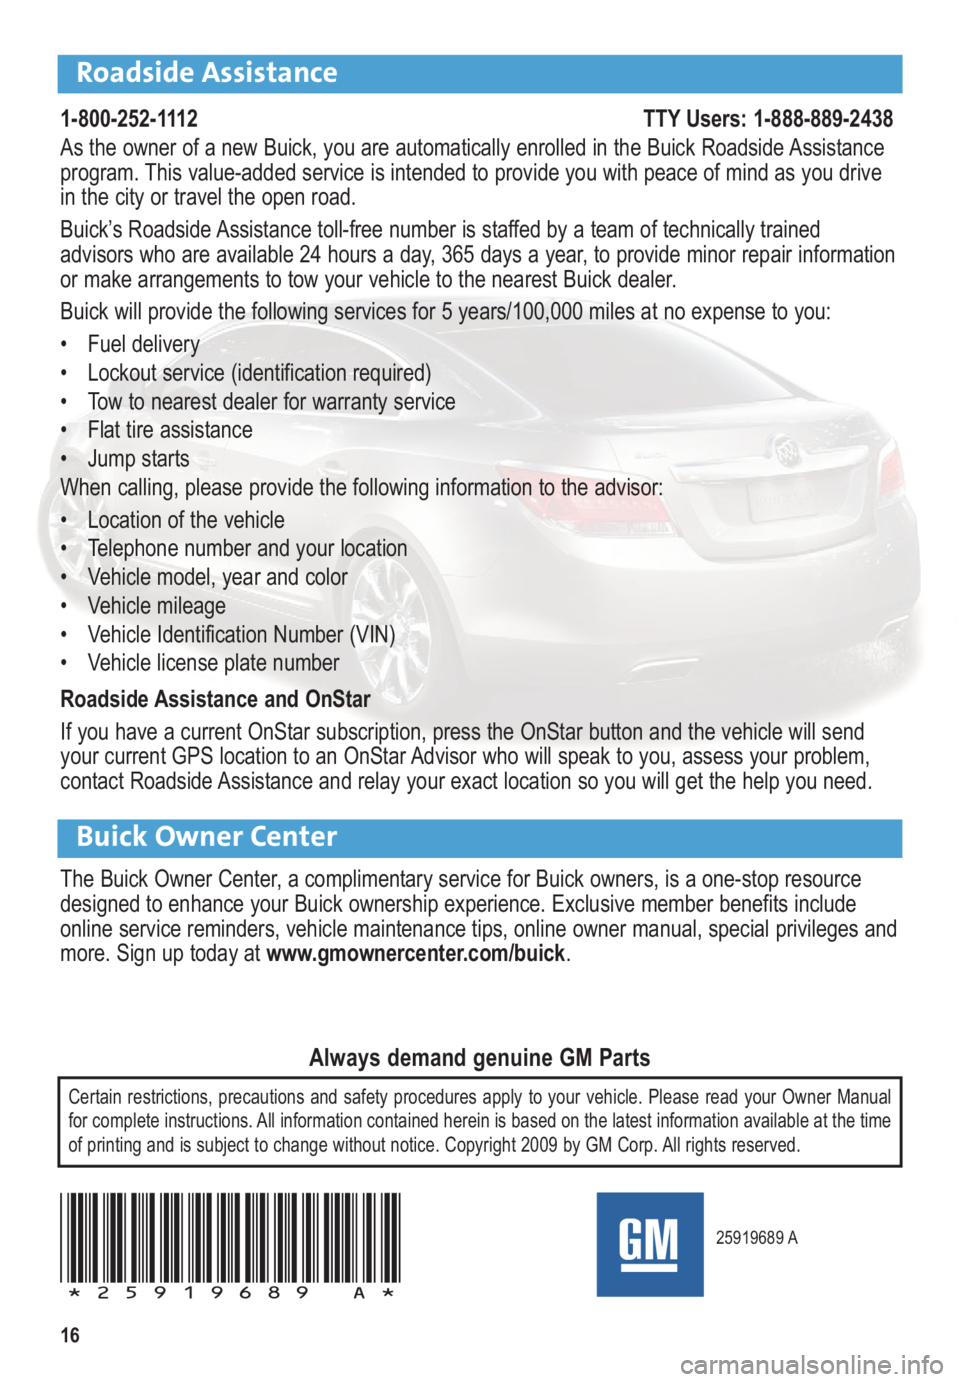 BUICK LACROSSE 2010  Get To Know Guide 16
Roadside Assistance
1-800-252-1112                                                                          TTY Users: 1-888-889-2438
As the owner of a new Buick, you are automatically enrolled in 